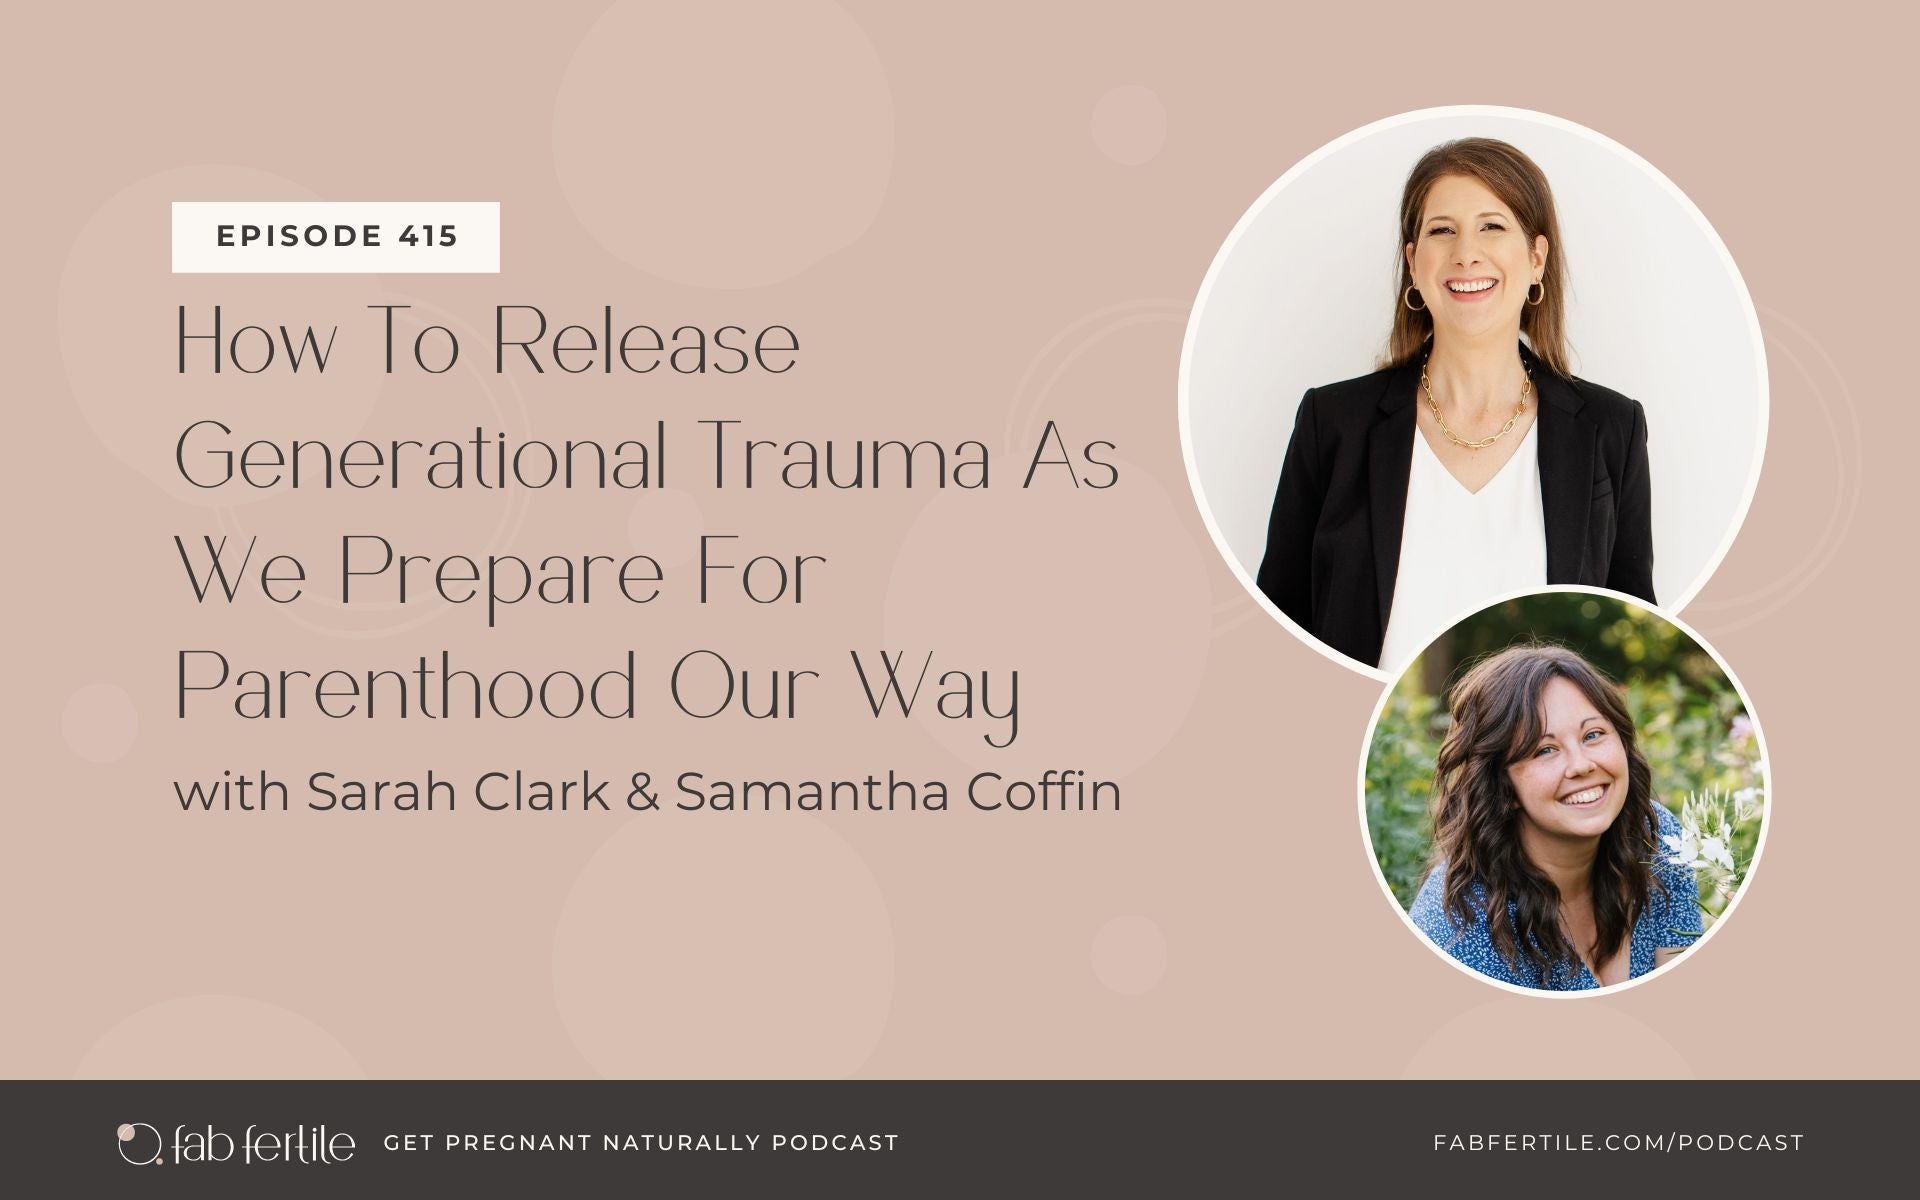 How To Release Generational Trauma As We Prepare For Parenthood Our Way